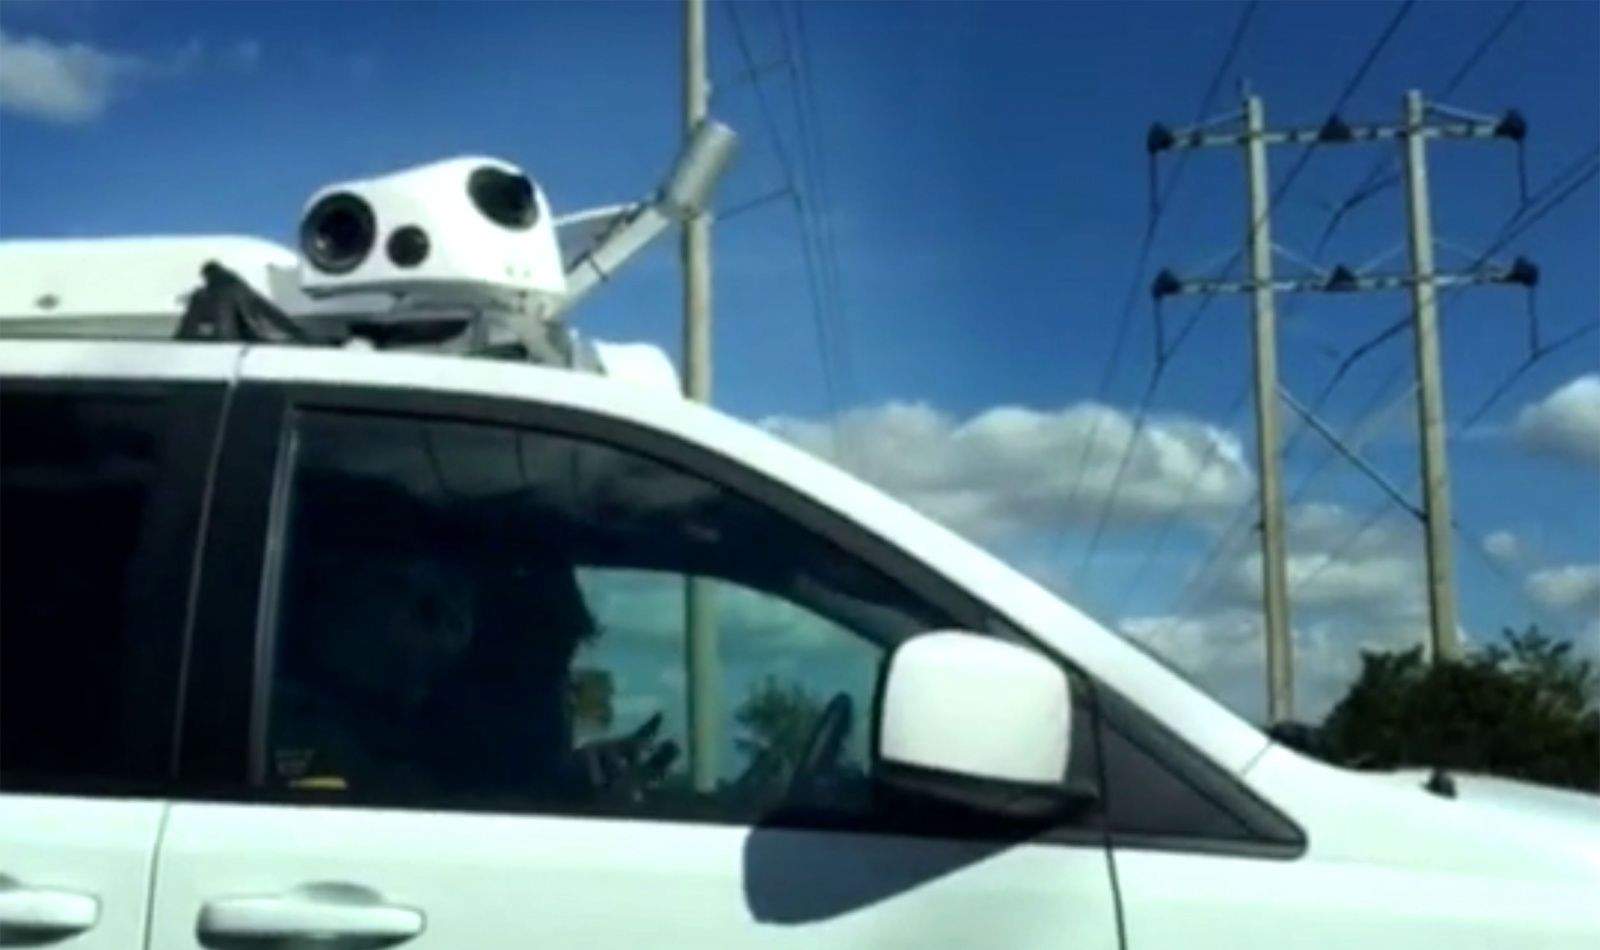 What are the LIDAR units doing on this Apple van? Photo: AppleInsider video